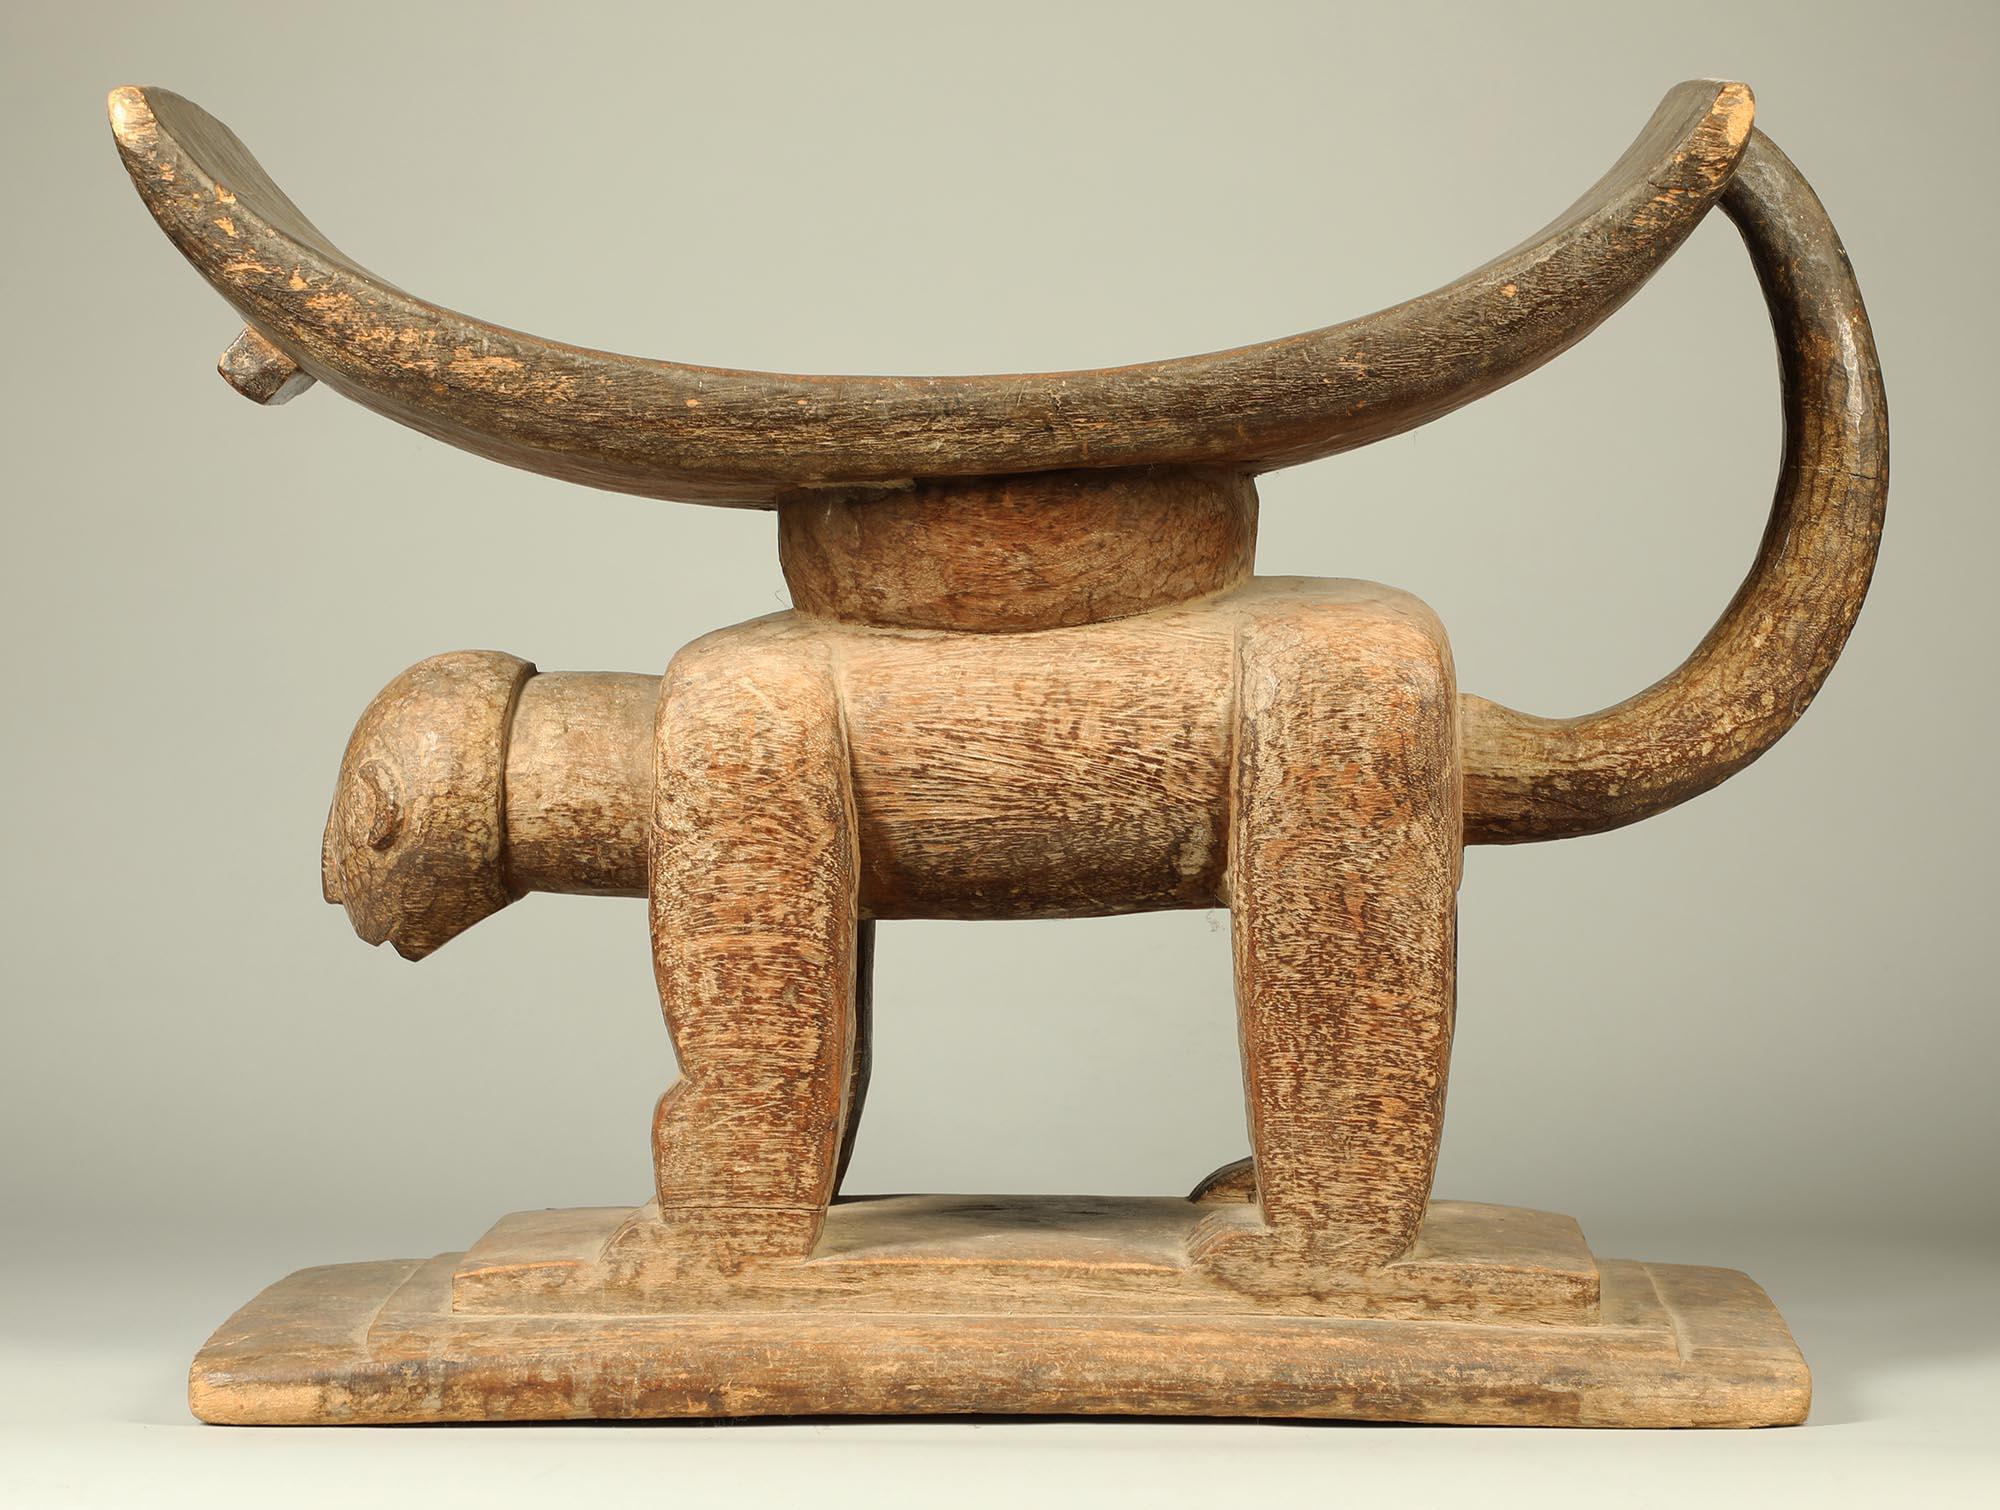 Created in the early to mid-20th century, by an anonymous artist of the Akan people of Ghana, probably Ashanti (Asante) or Fanti (Fante).
What separates this stool from the standard Akan stool or seat is the way the artist has used the wood grain to